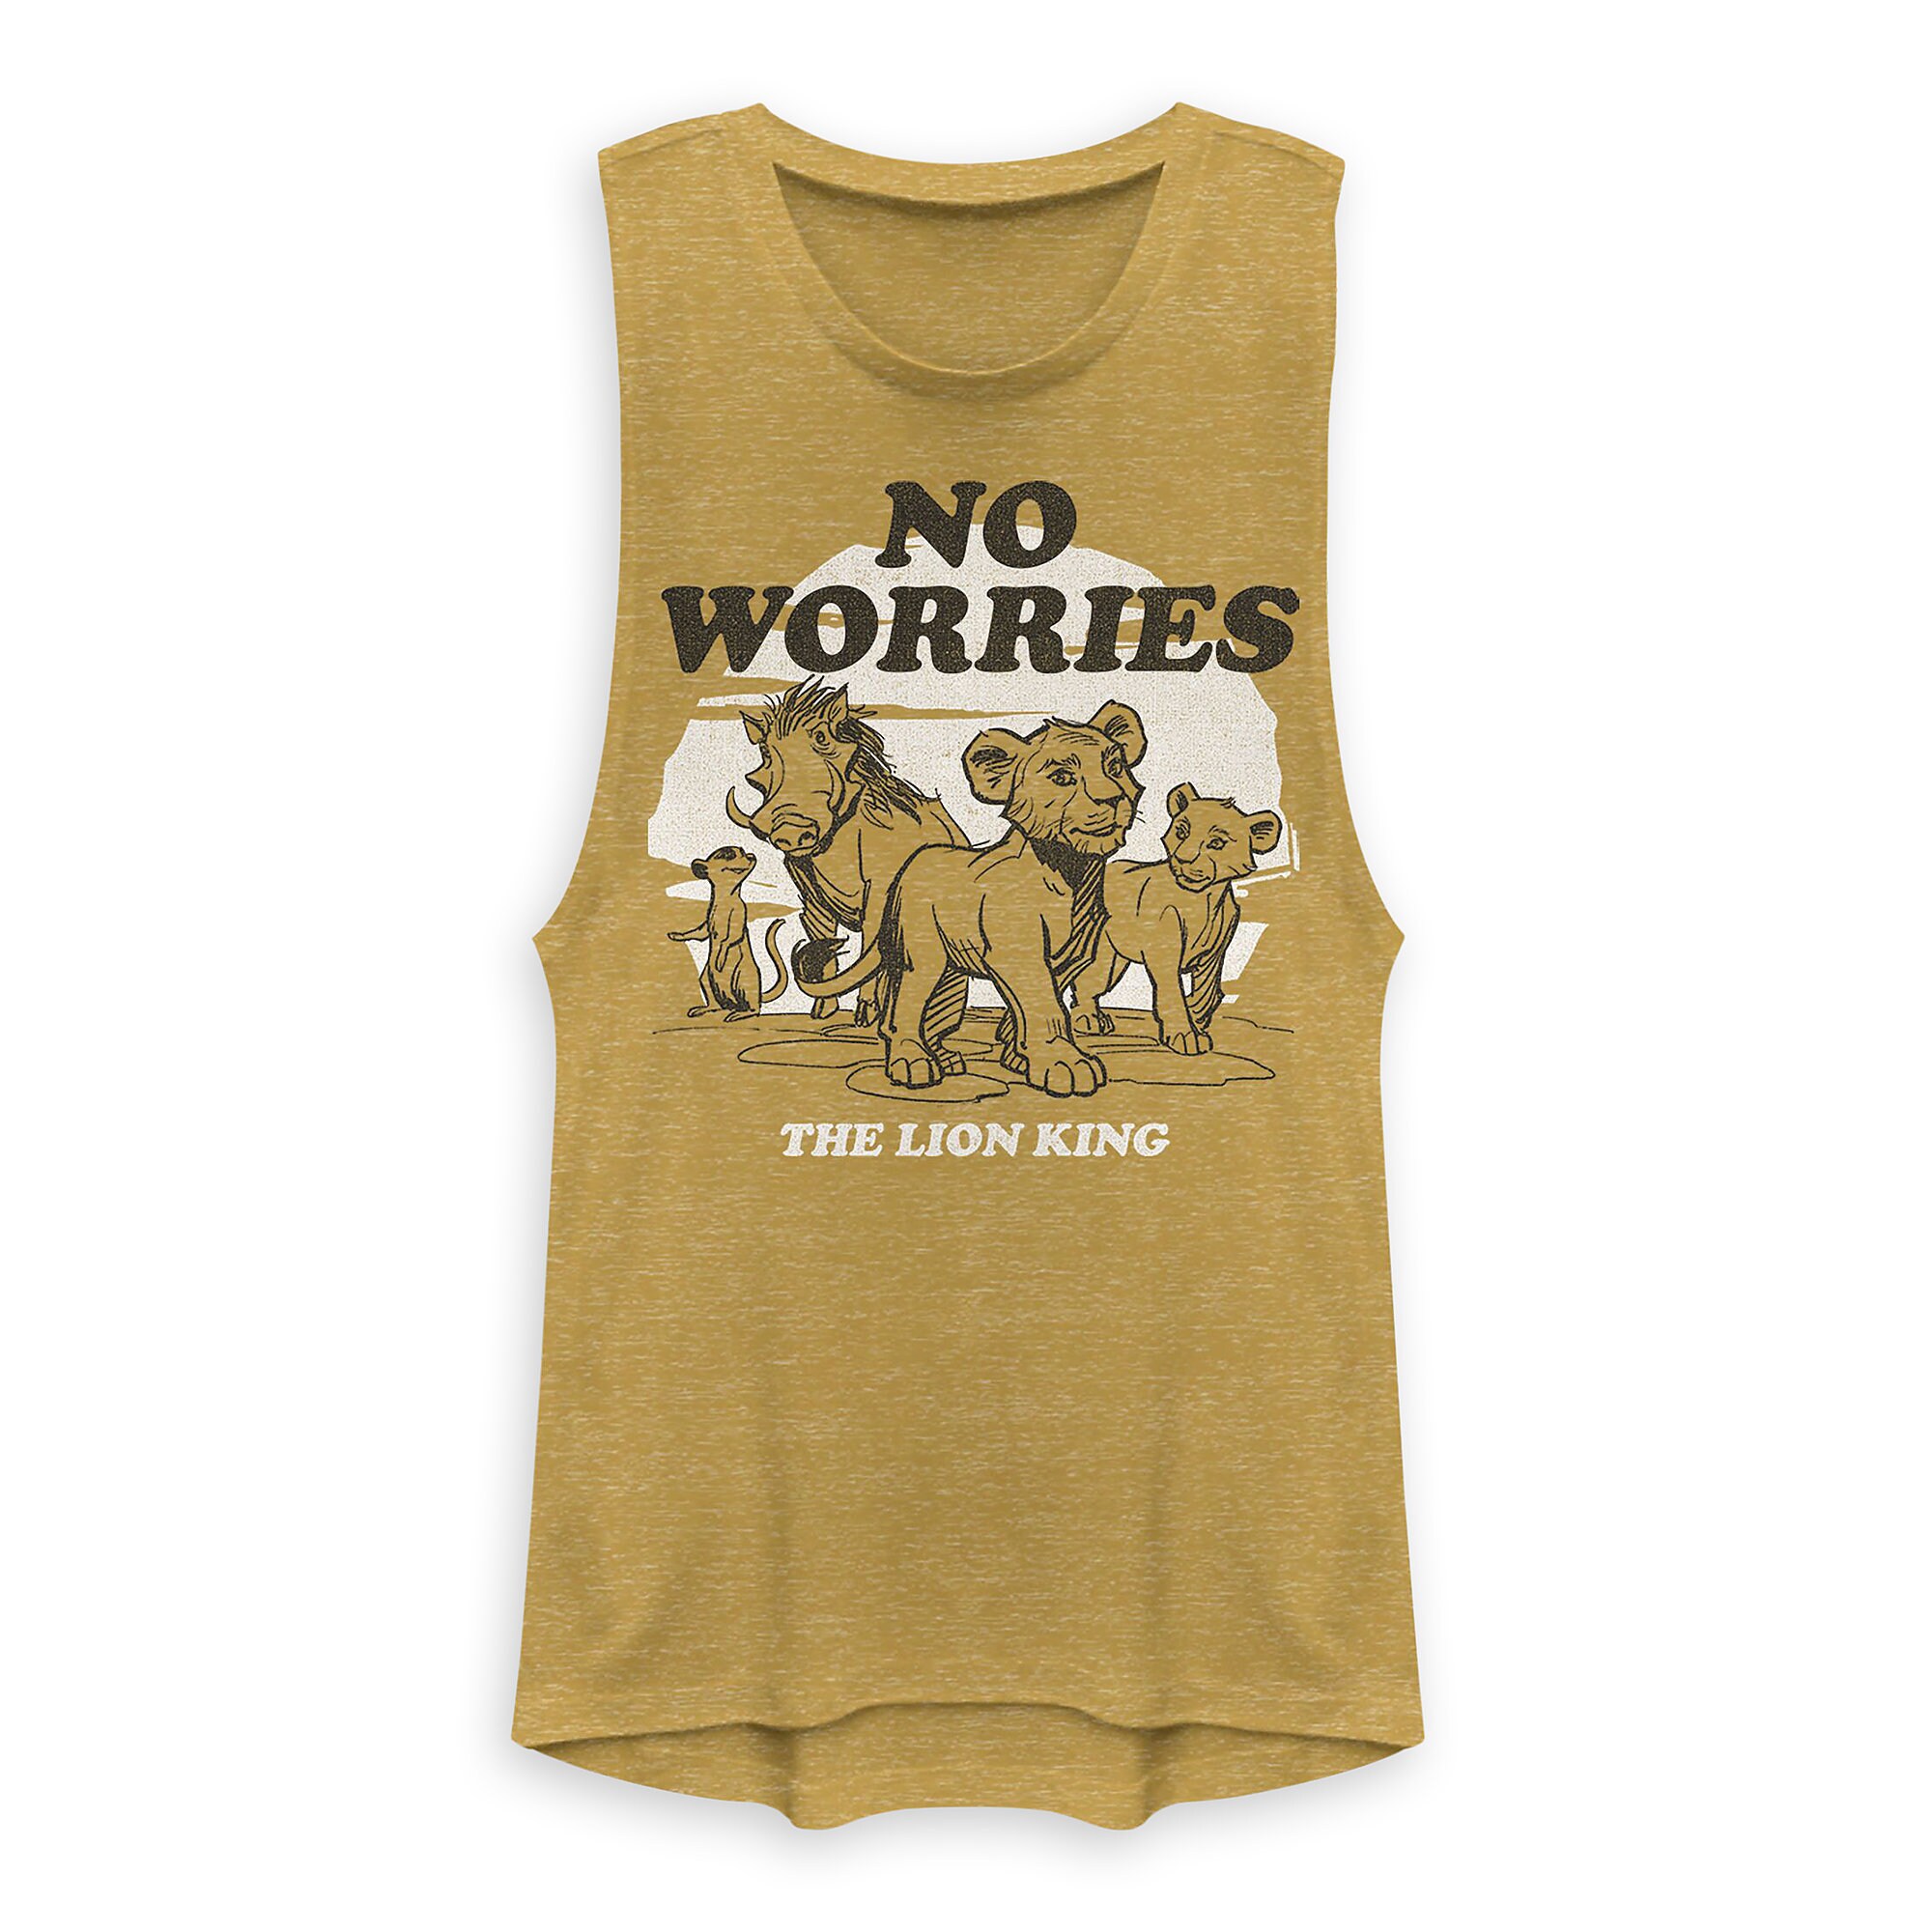 The Lion King Tank Top for Juniors - 2019 Film